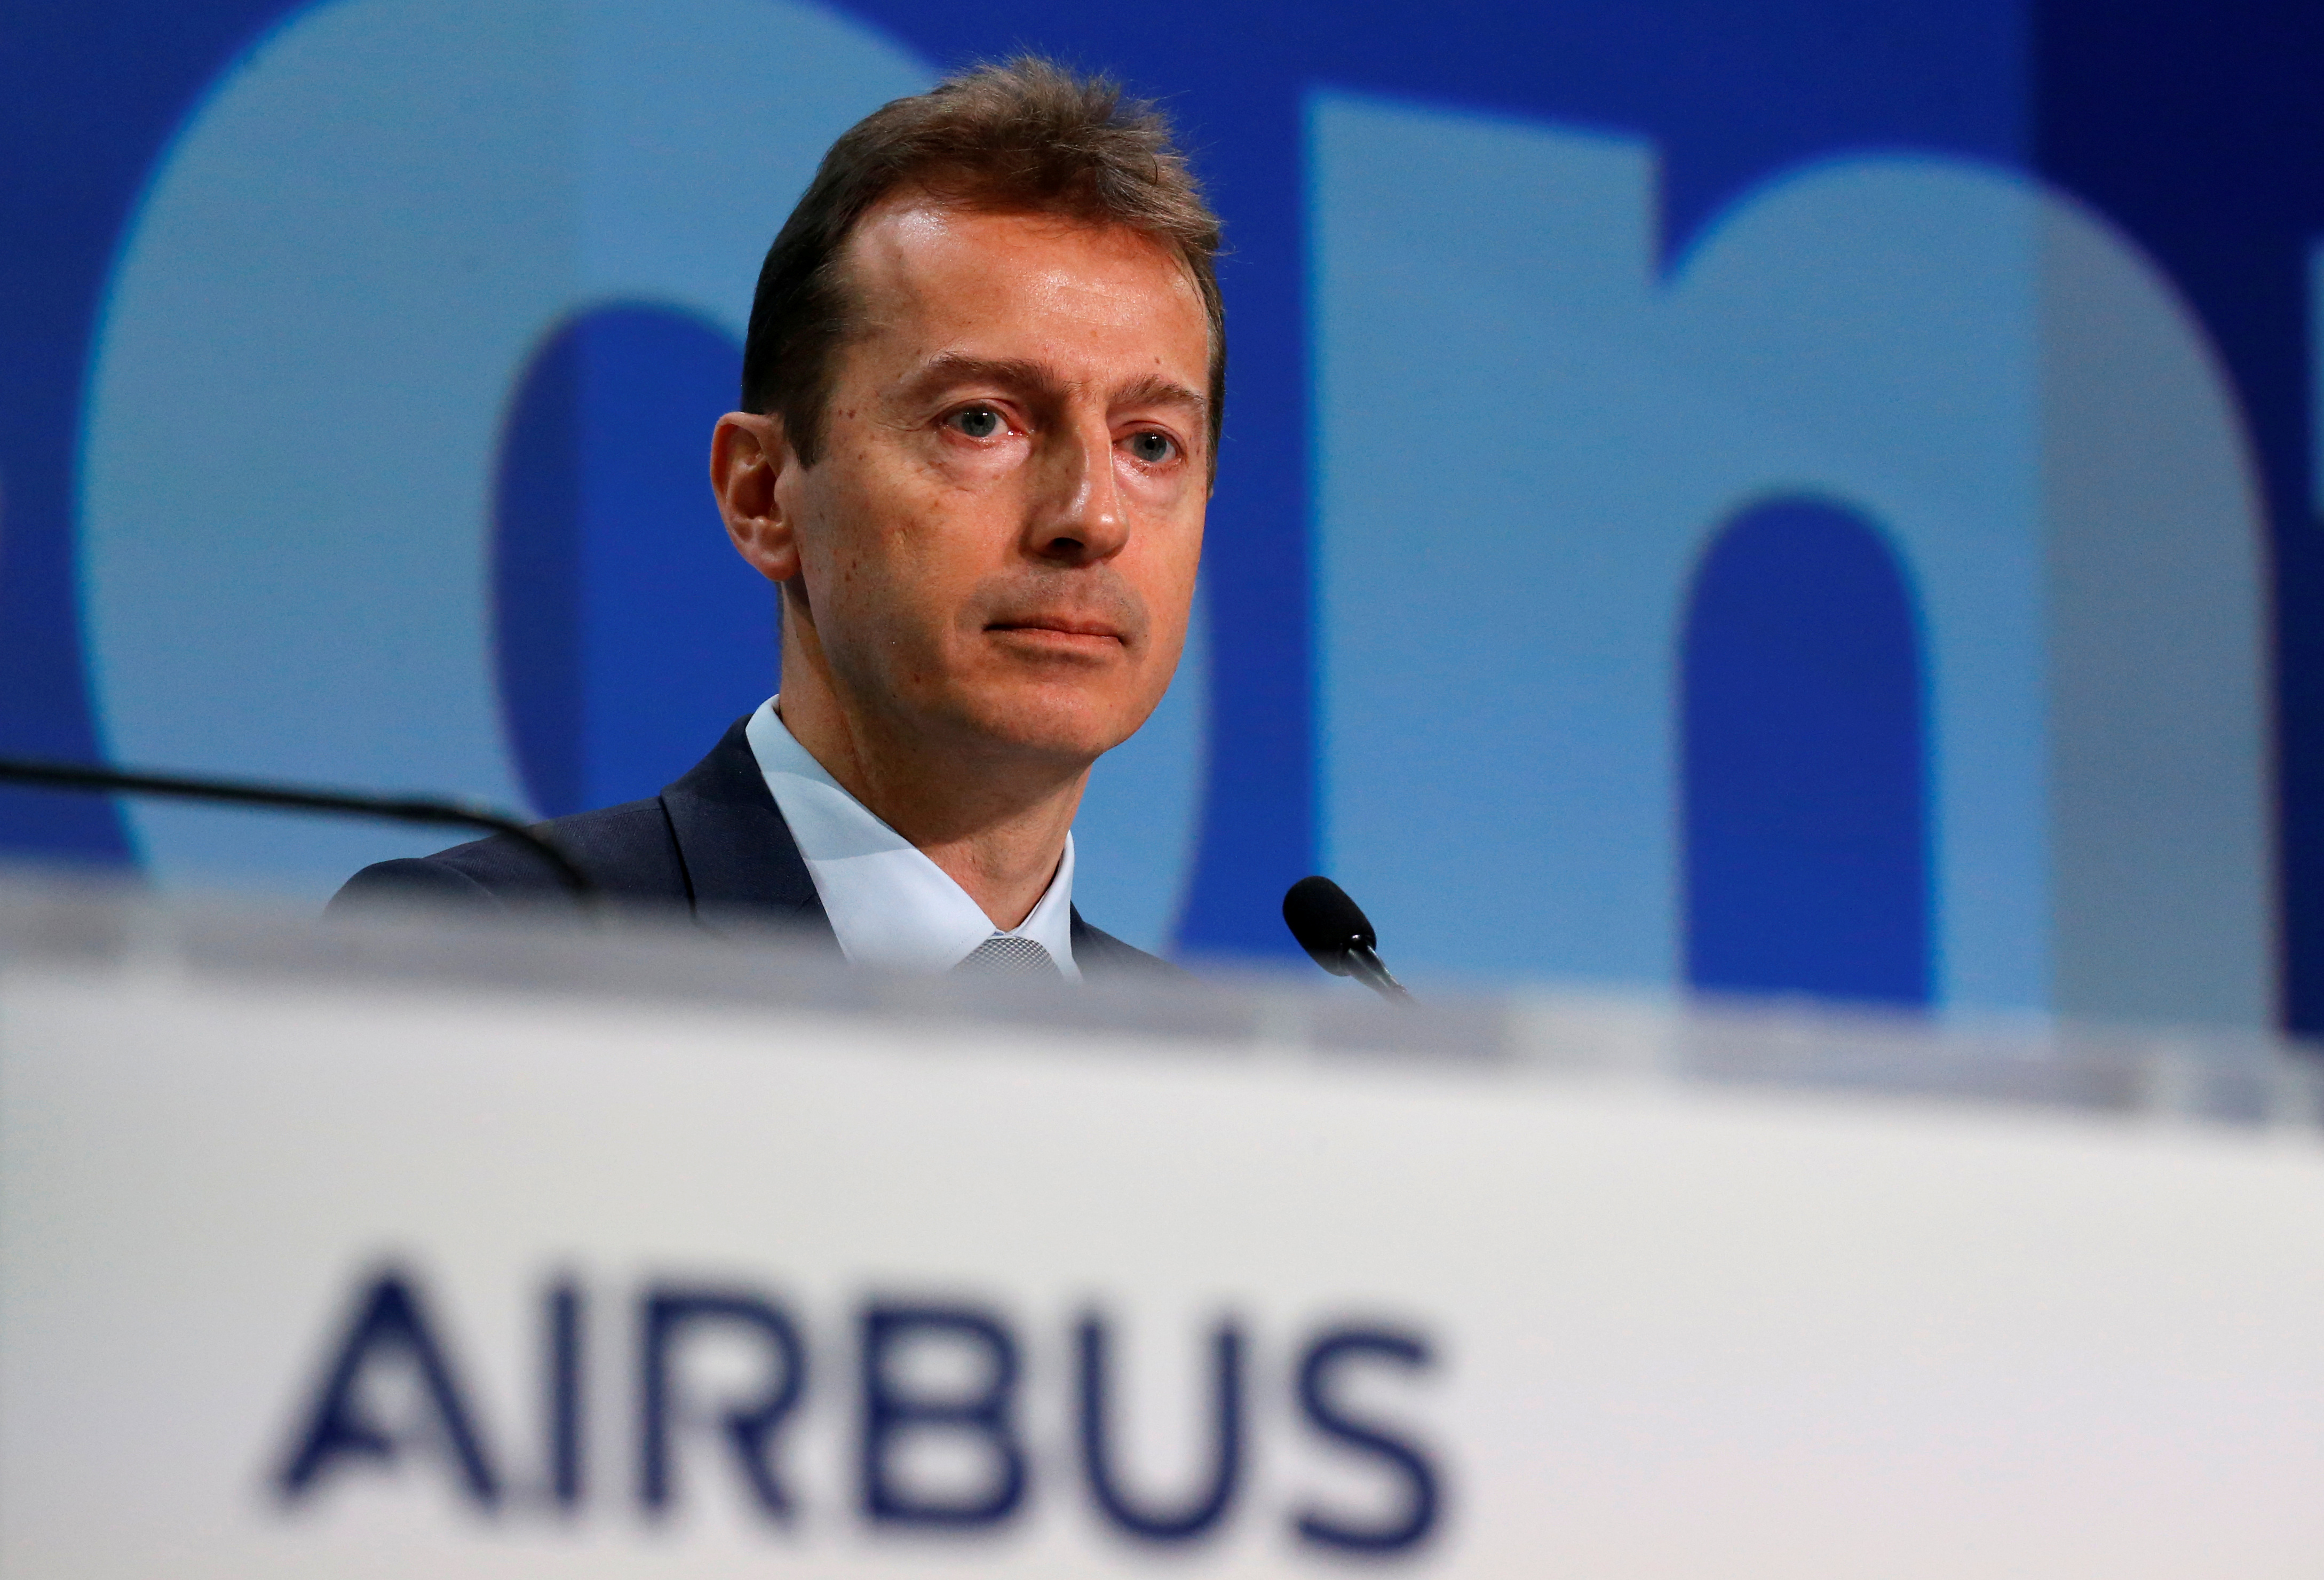 People want to fly again': Airbus CEO expects business travel to recover  -NZZ | Reuters